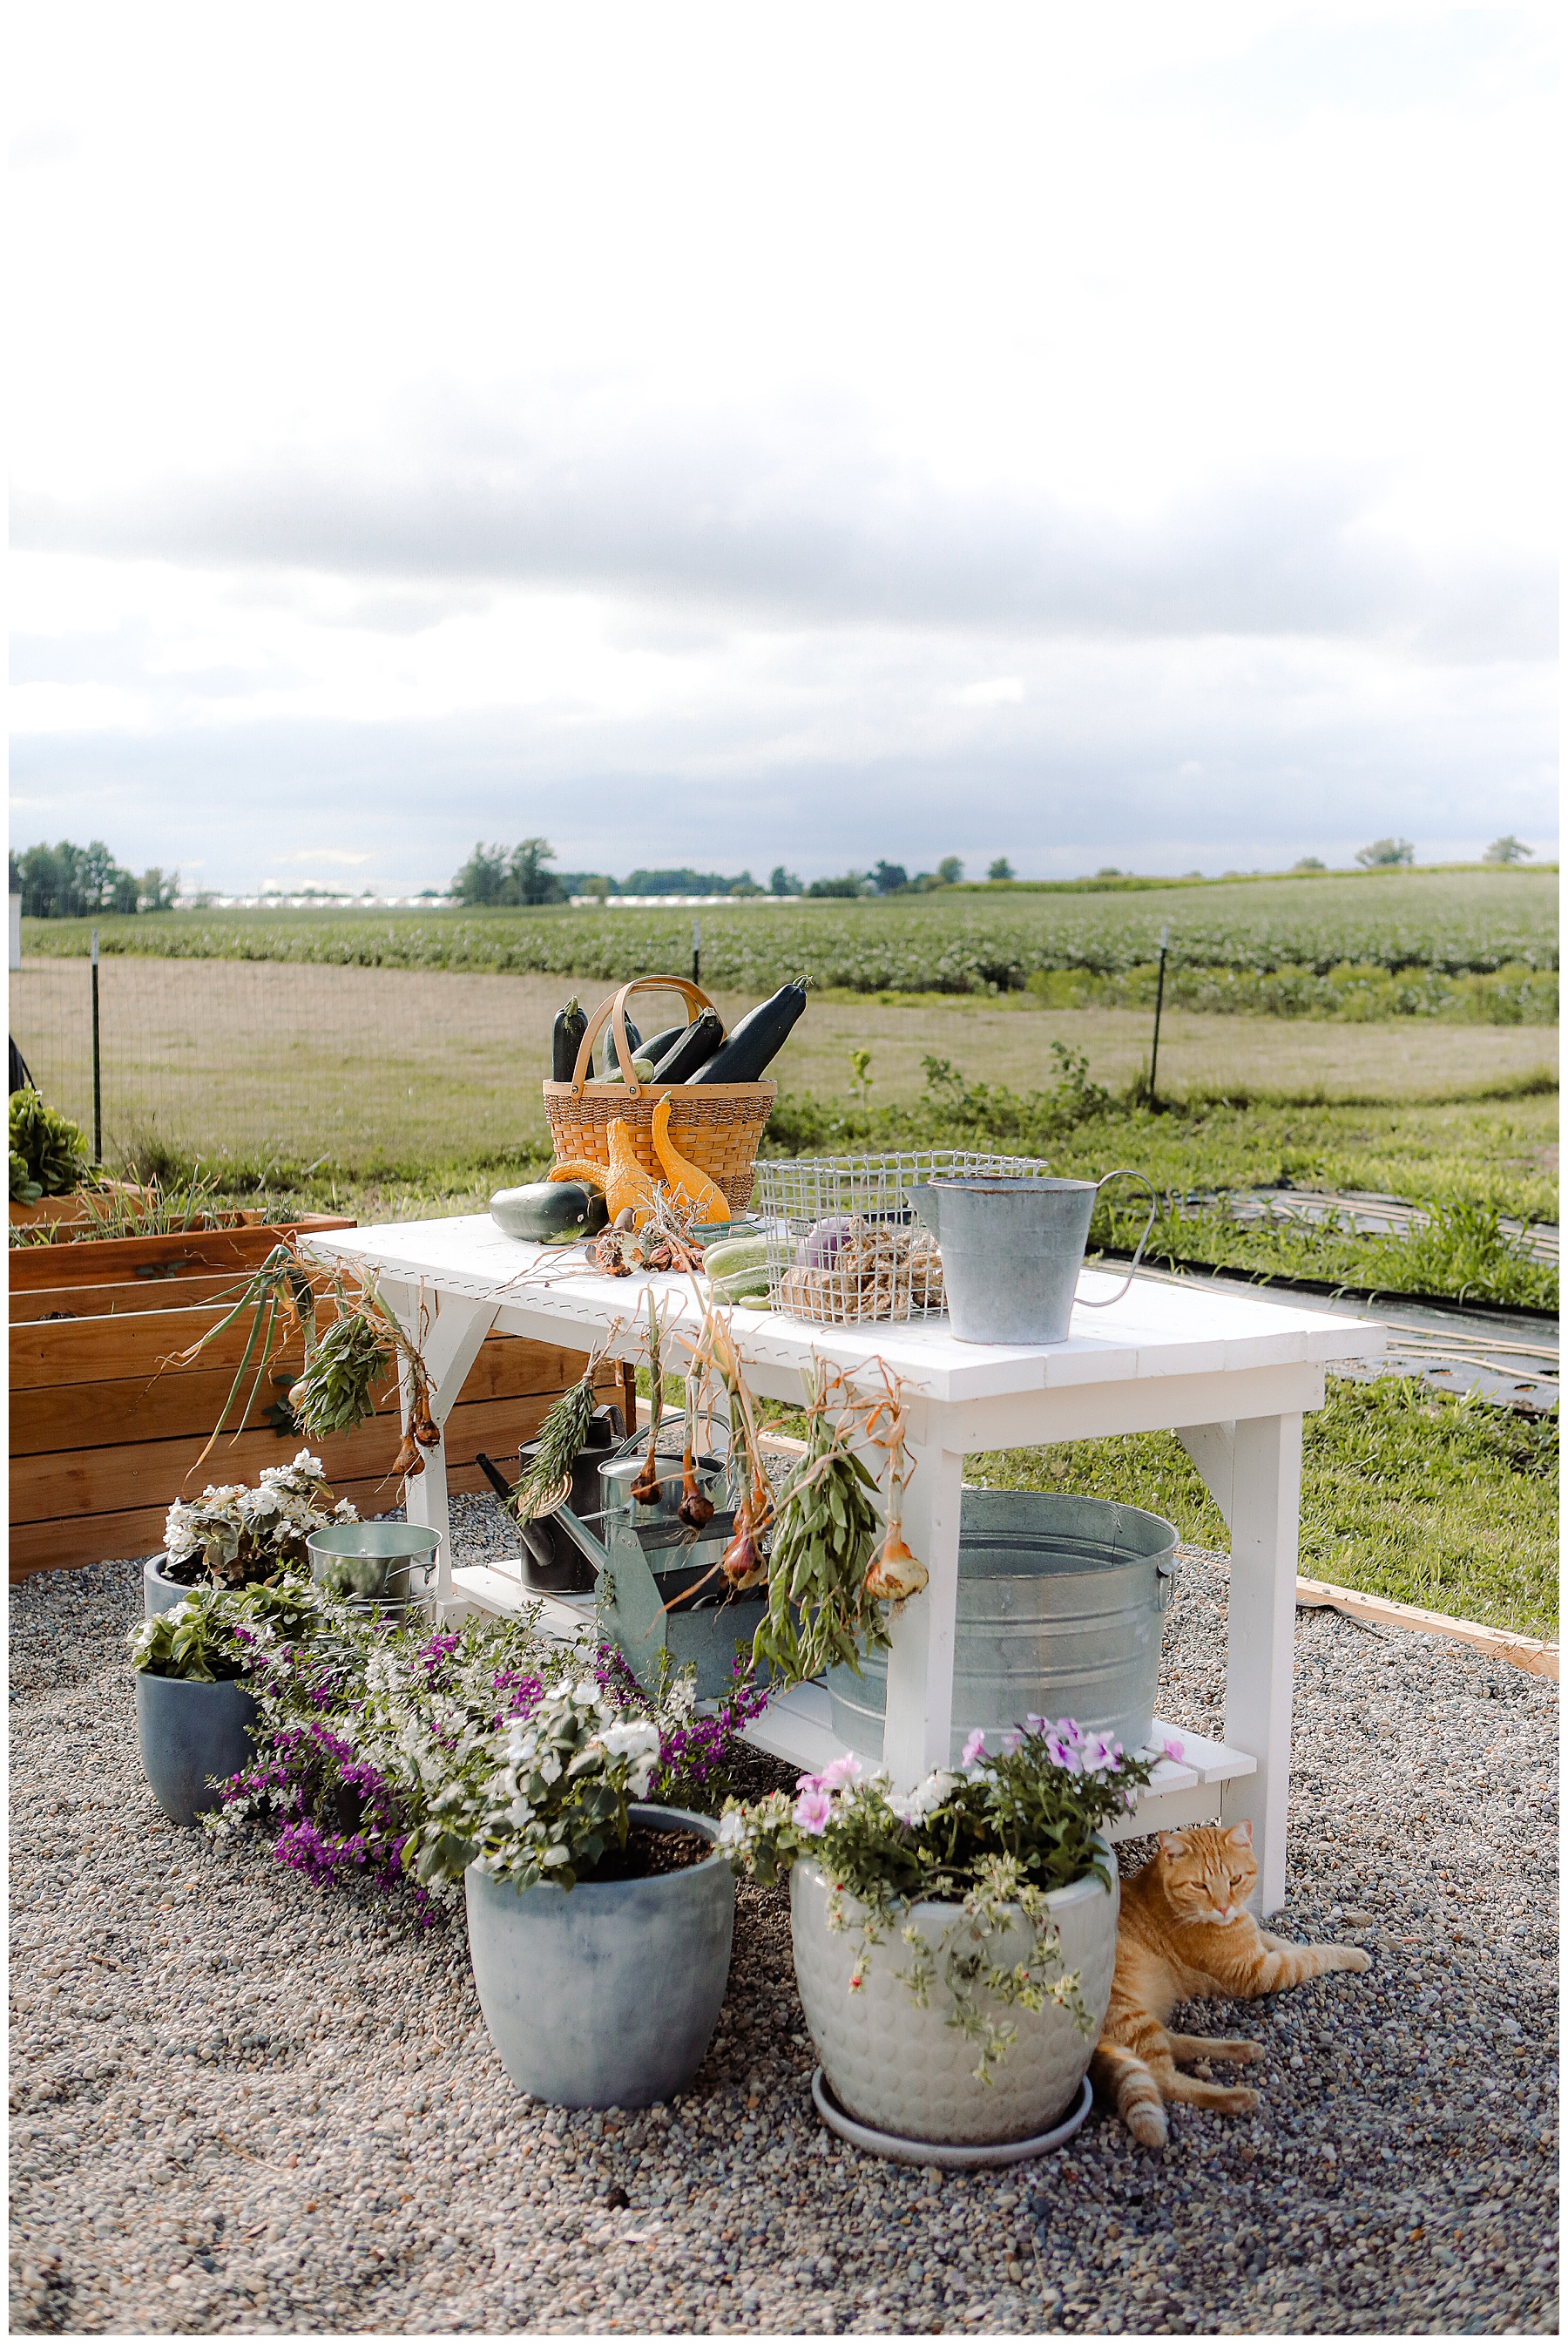 Creating and outdoor potting bench